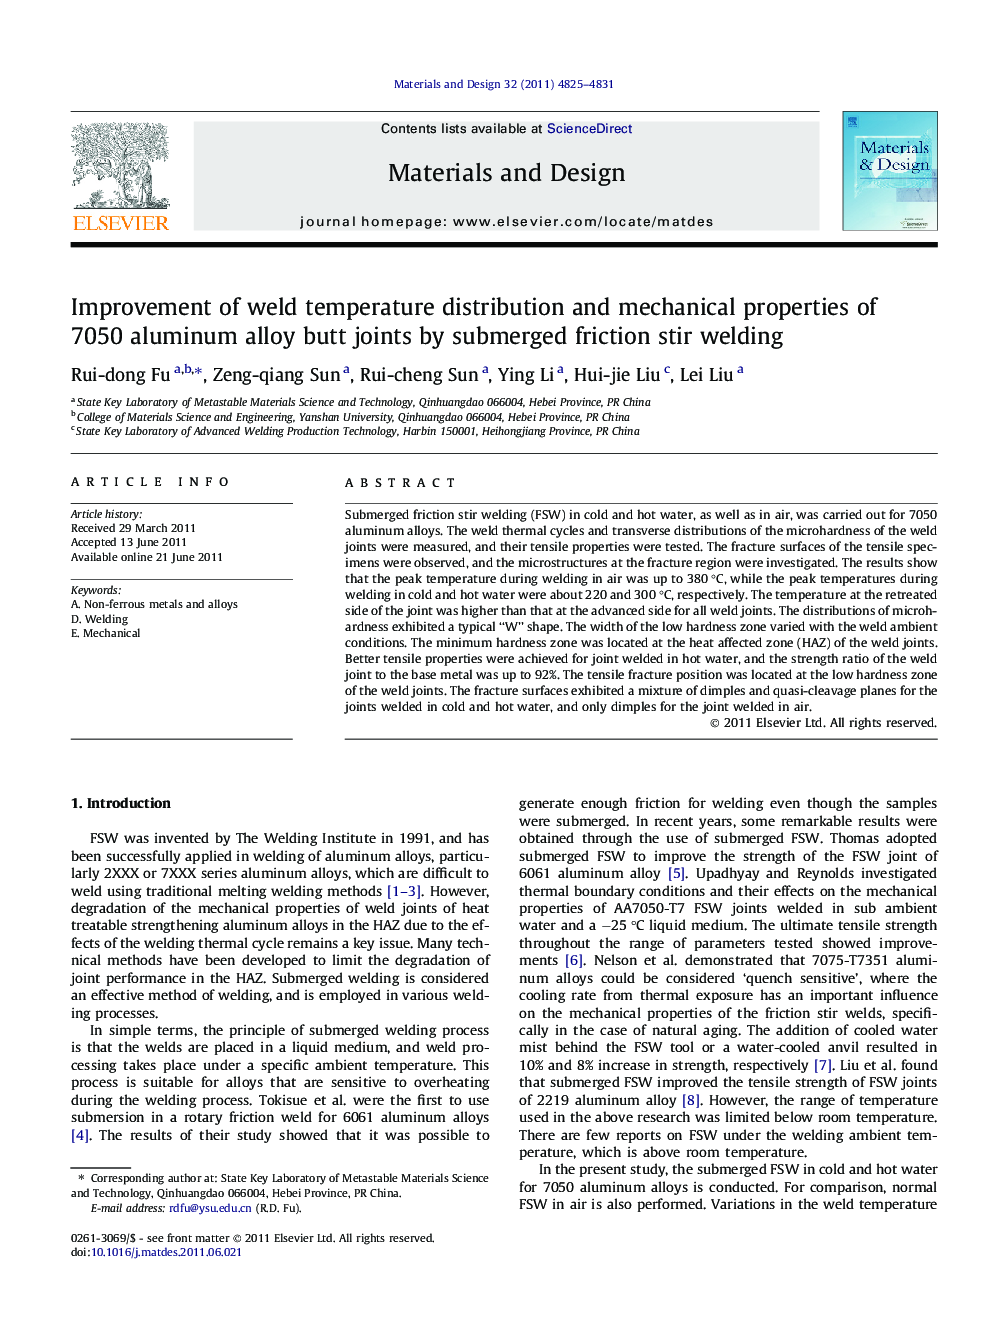 Improvement of weld temperature distribution and mechanical properties of 7050 aluminum alloy butt joints by submerged friction stir welding